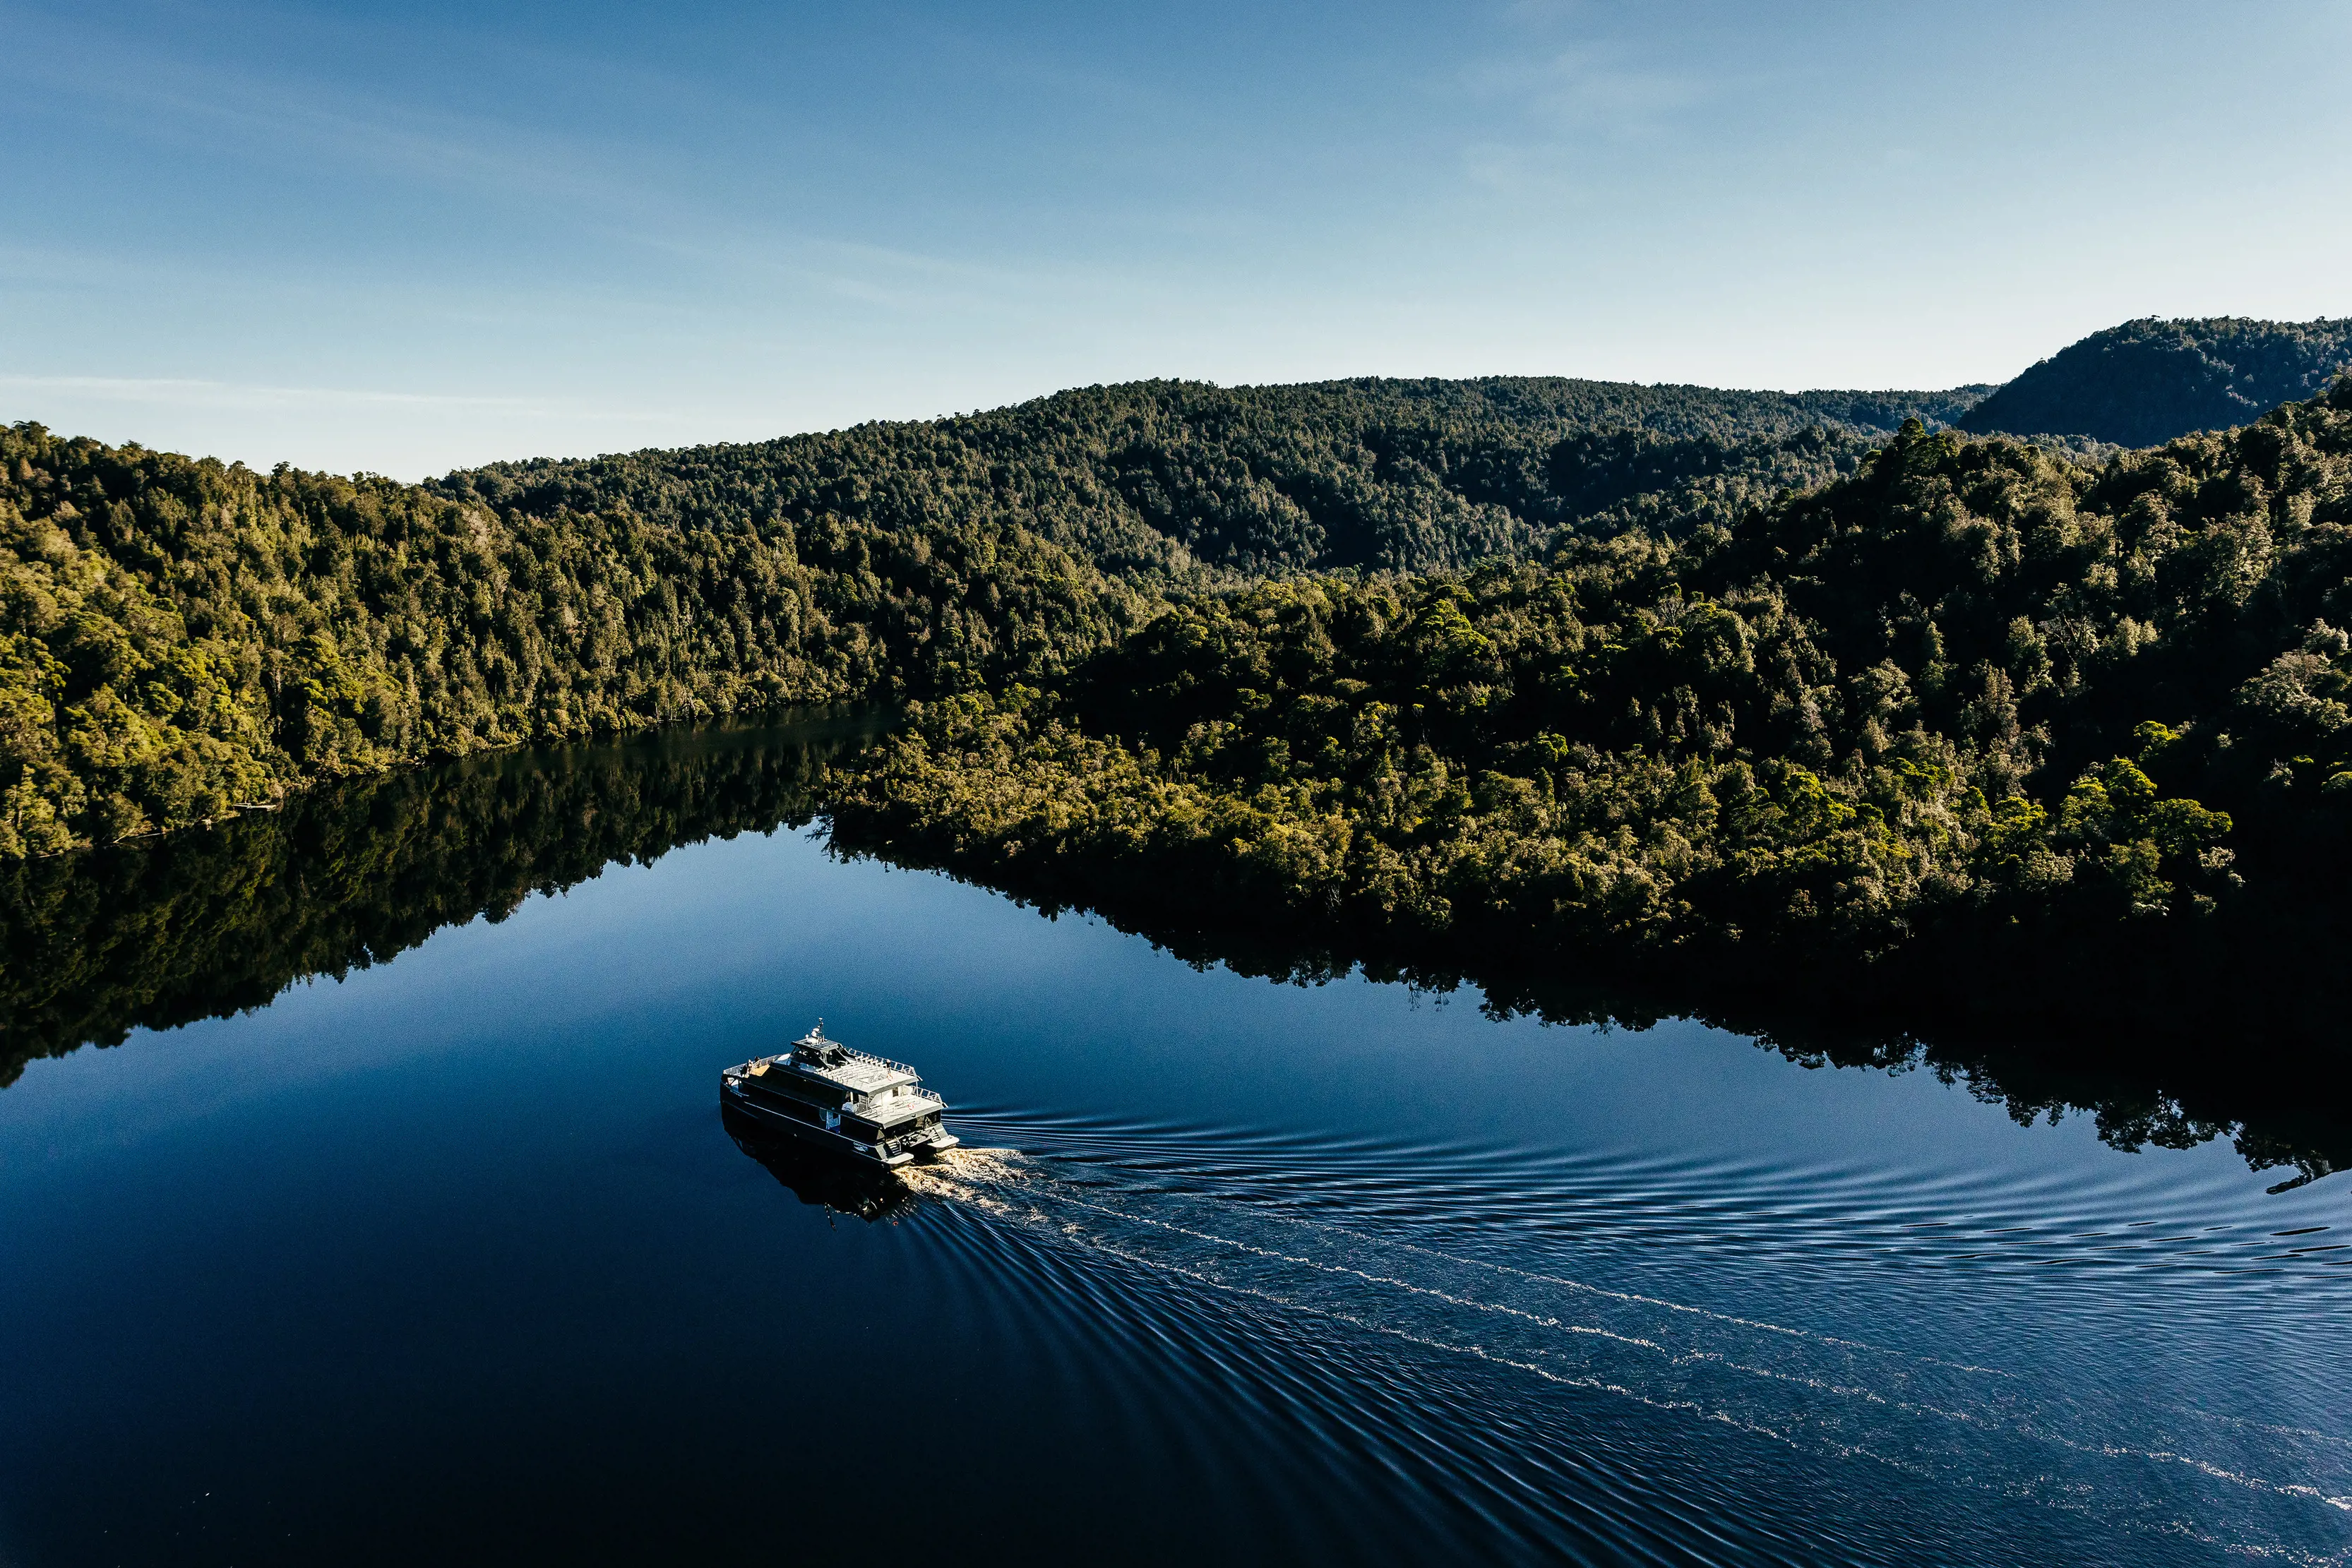 Incredible aerial image of Gordon River Cruises, piloting through Gordon River, surrounded by lush forest on either side of the river.